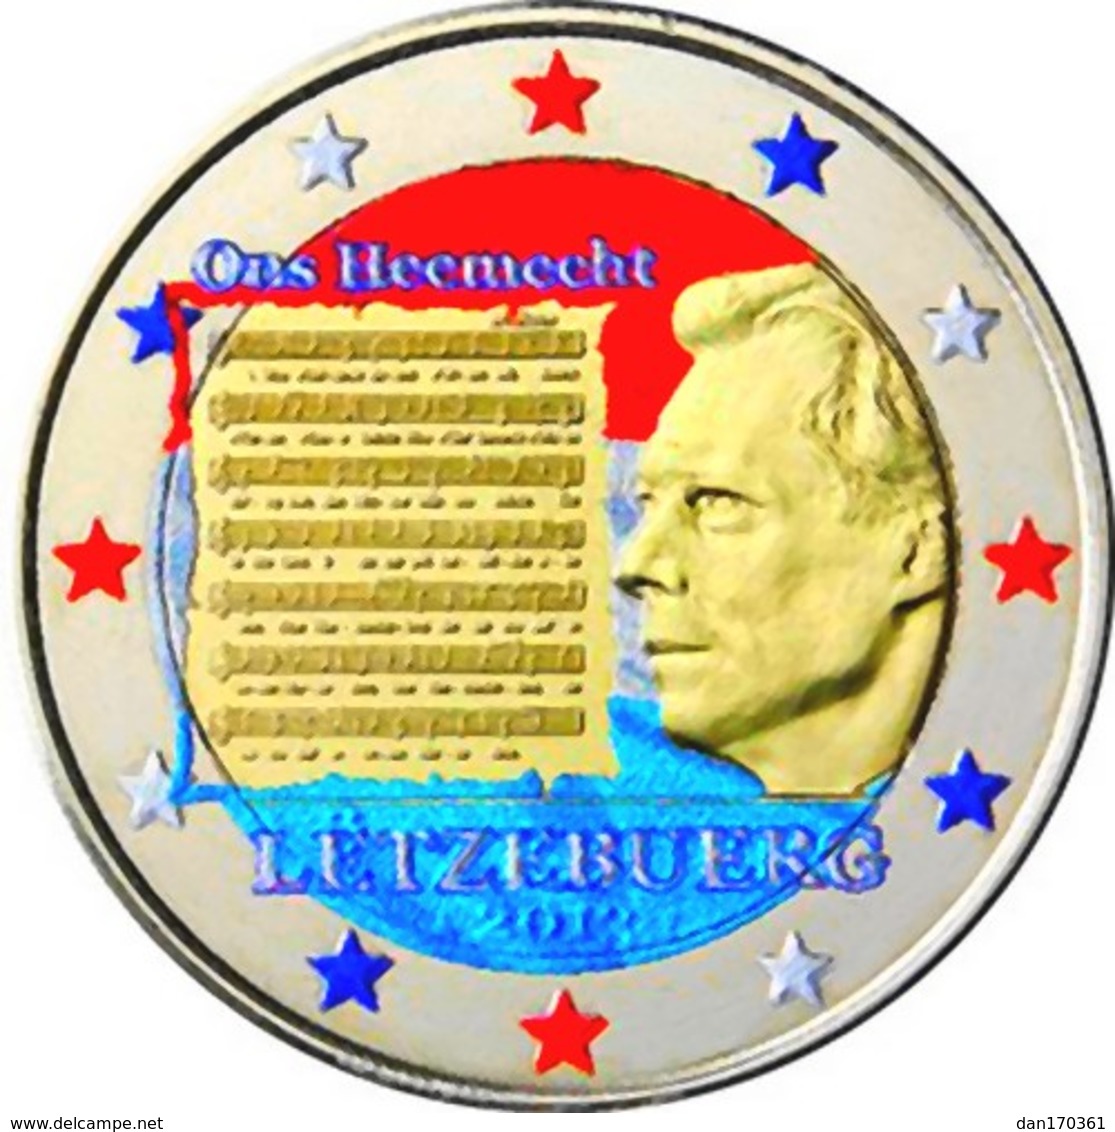 LUXEMBOURG 2013 - 2 EUROS - HYMNE - COULEUR - FARBE - Luxembourg